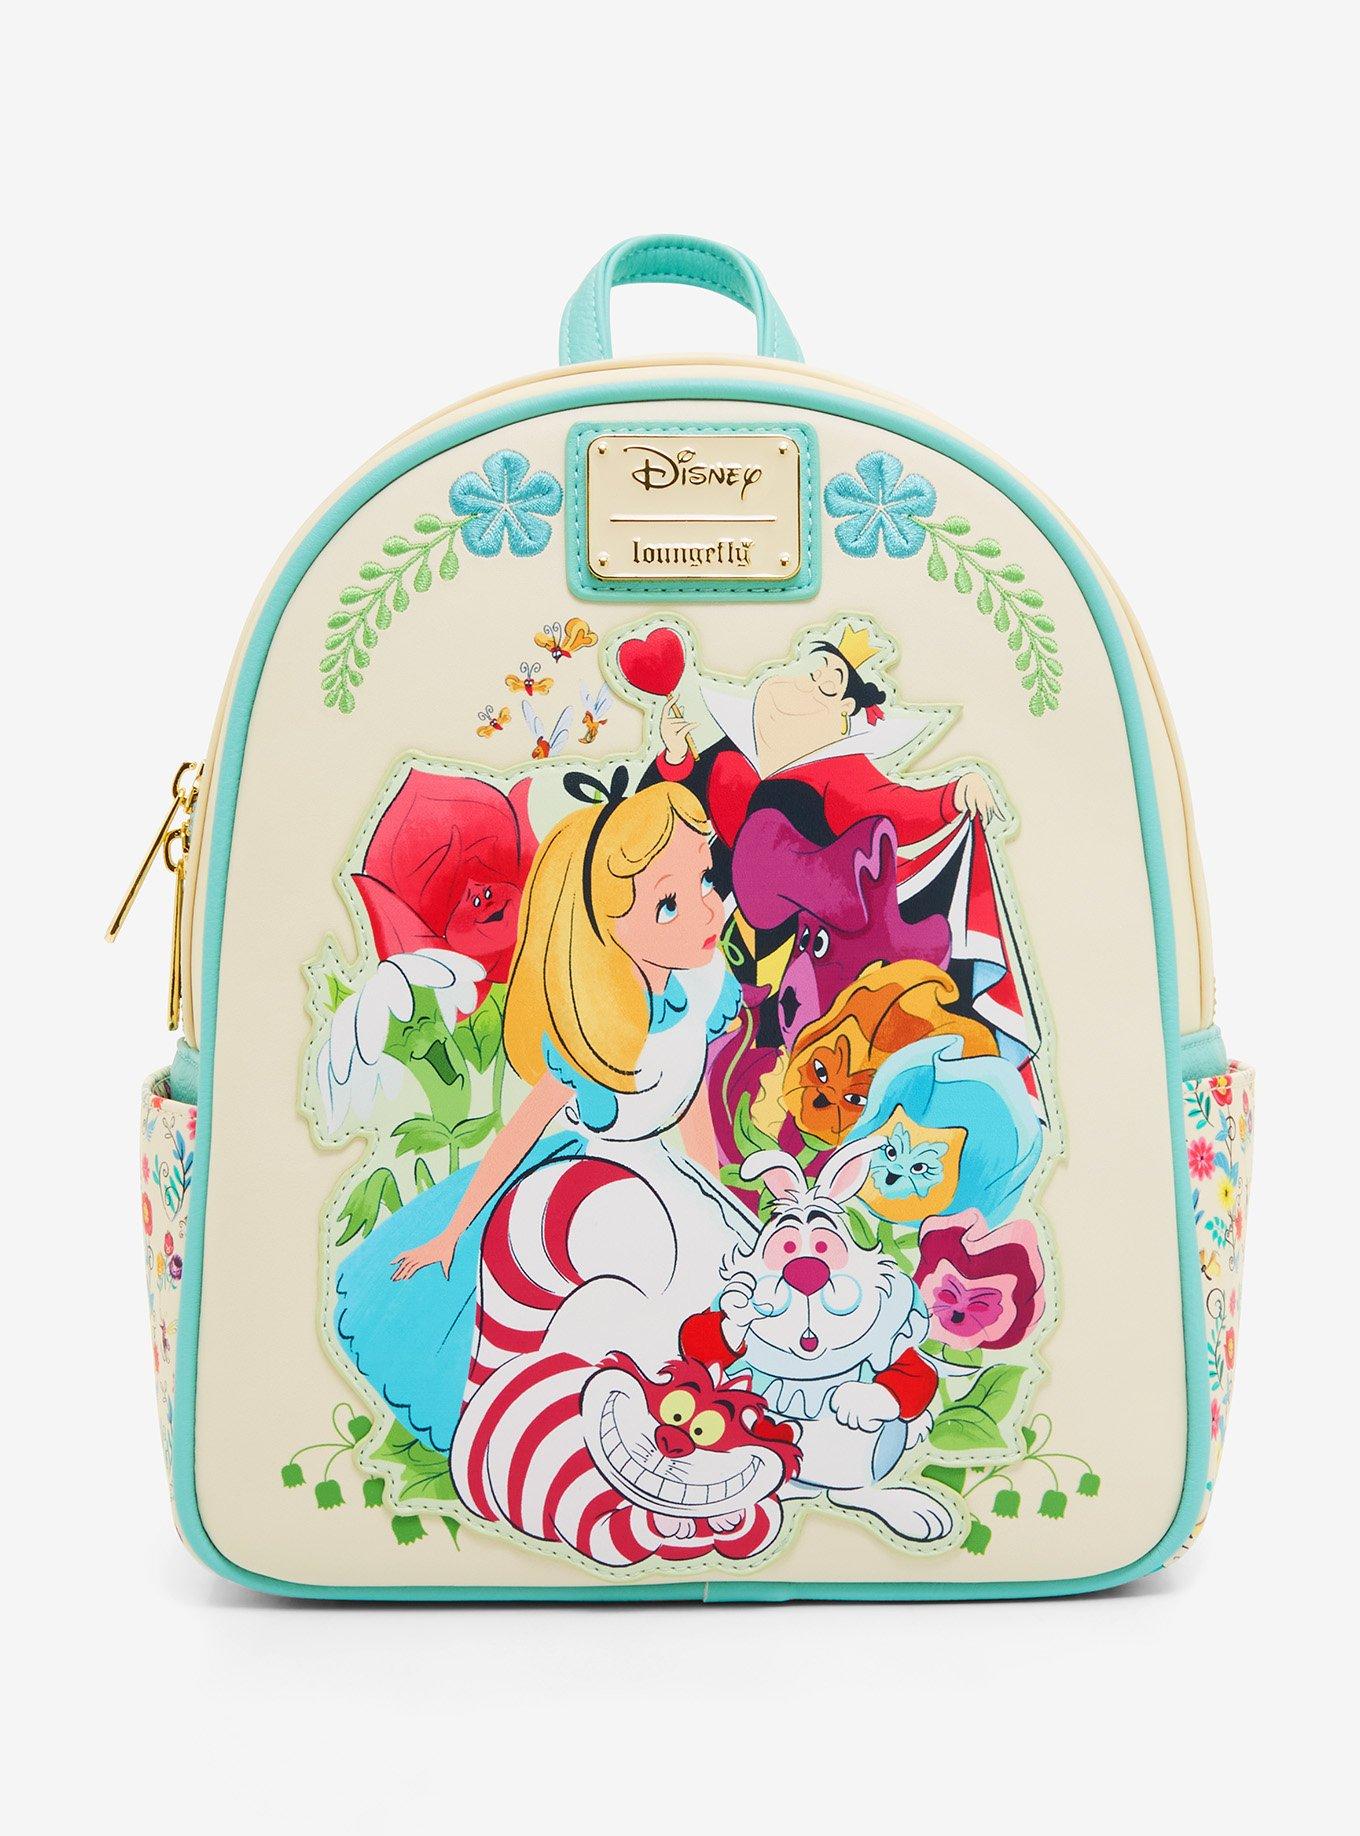 Buy Lady and the Tramp Portrait House Mini Backpack at Loungefly.